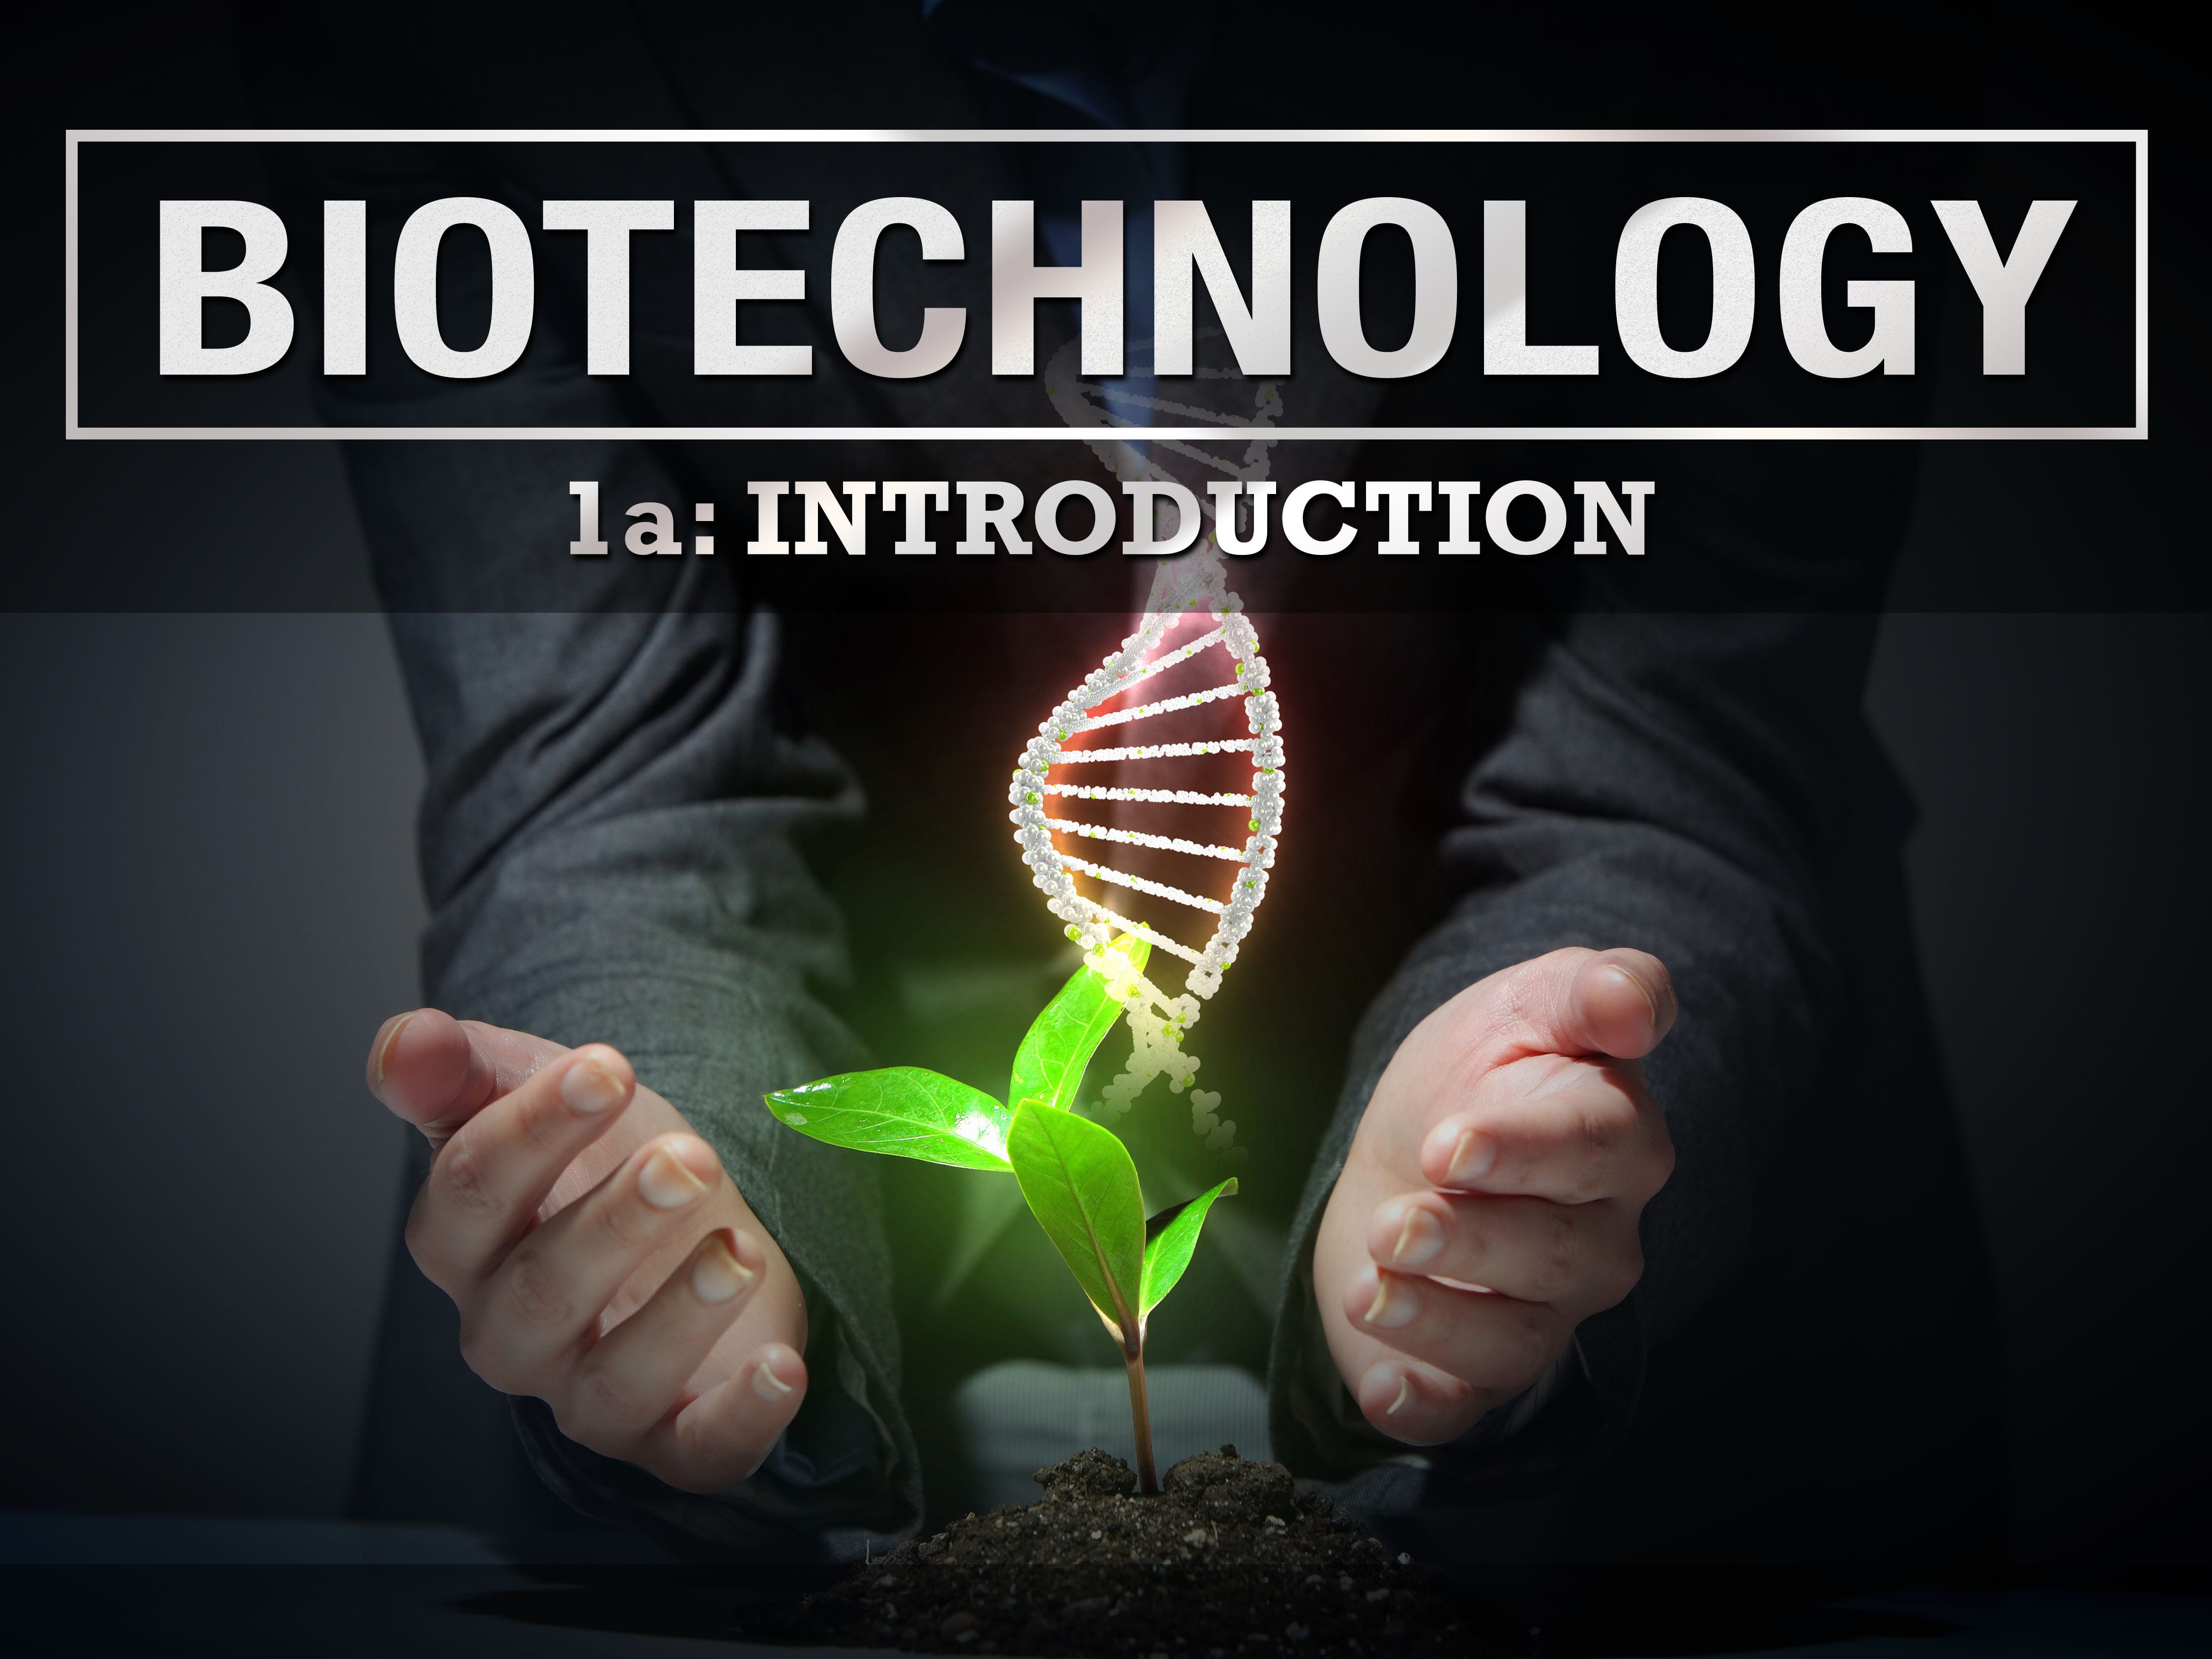 eDL CTE course: Biotechnology 1a: Introduction